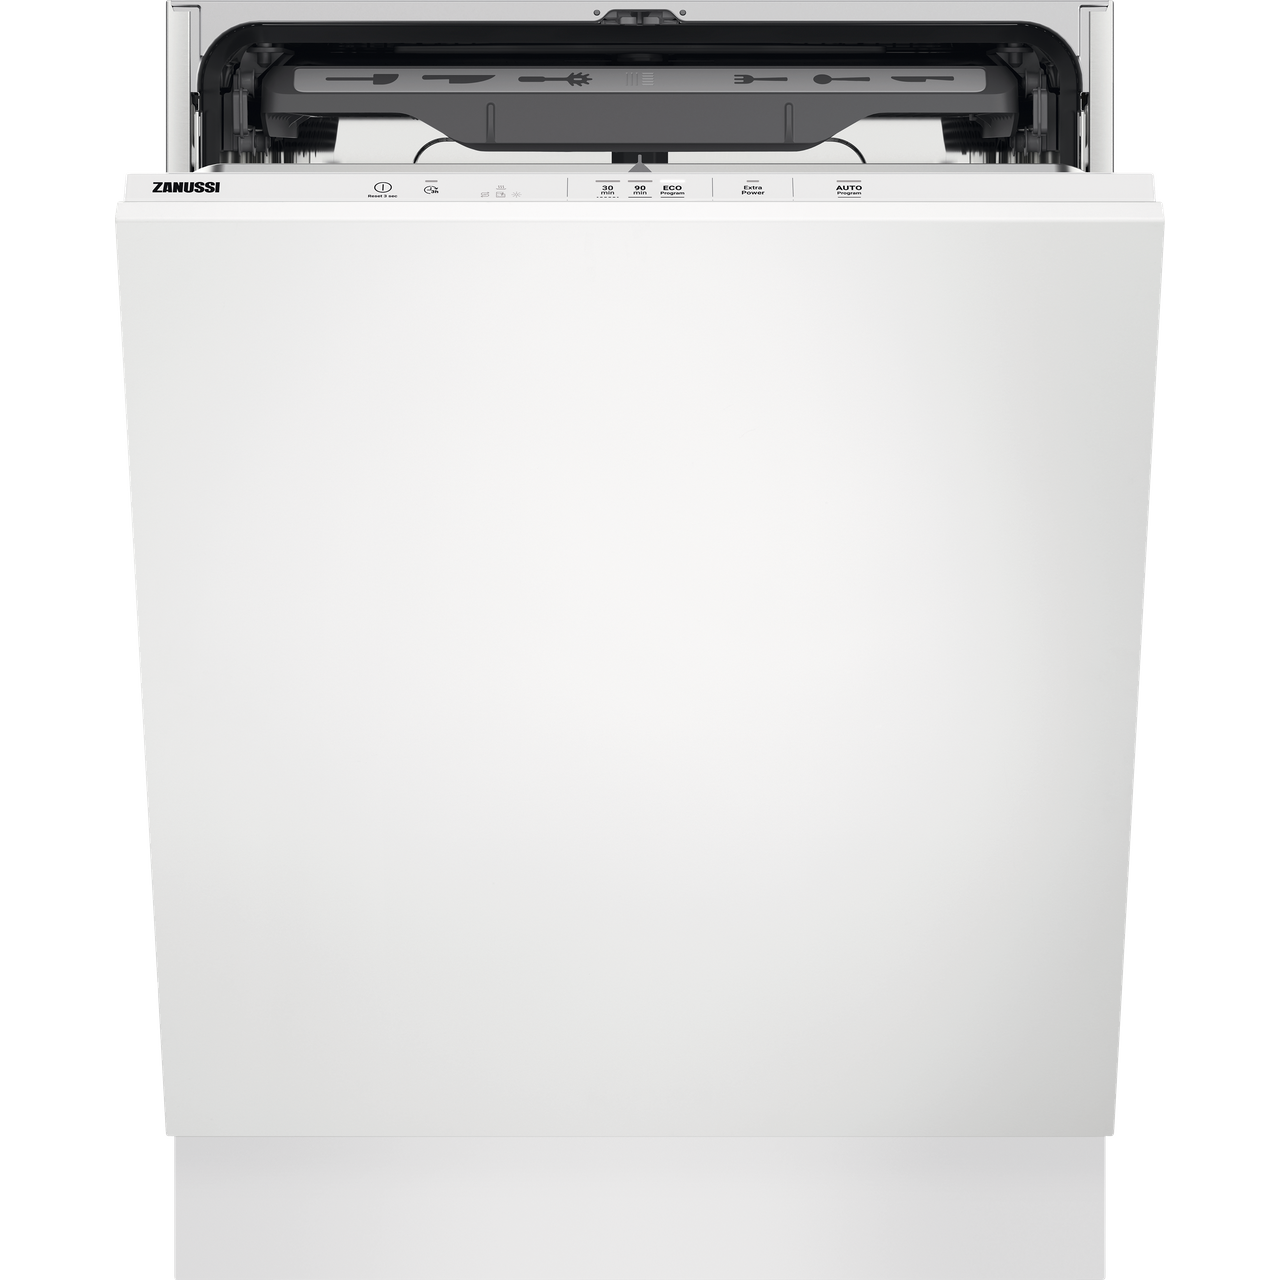 Zanussi ZDLN2621 Fully Integrated Standard Dishwasher Review